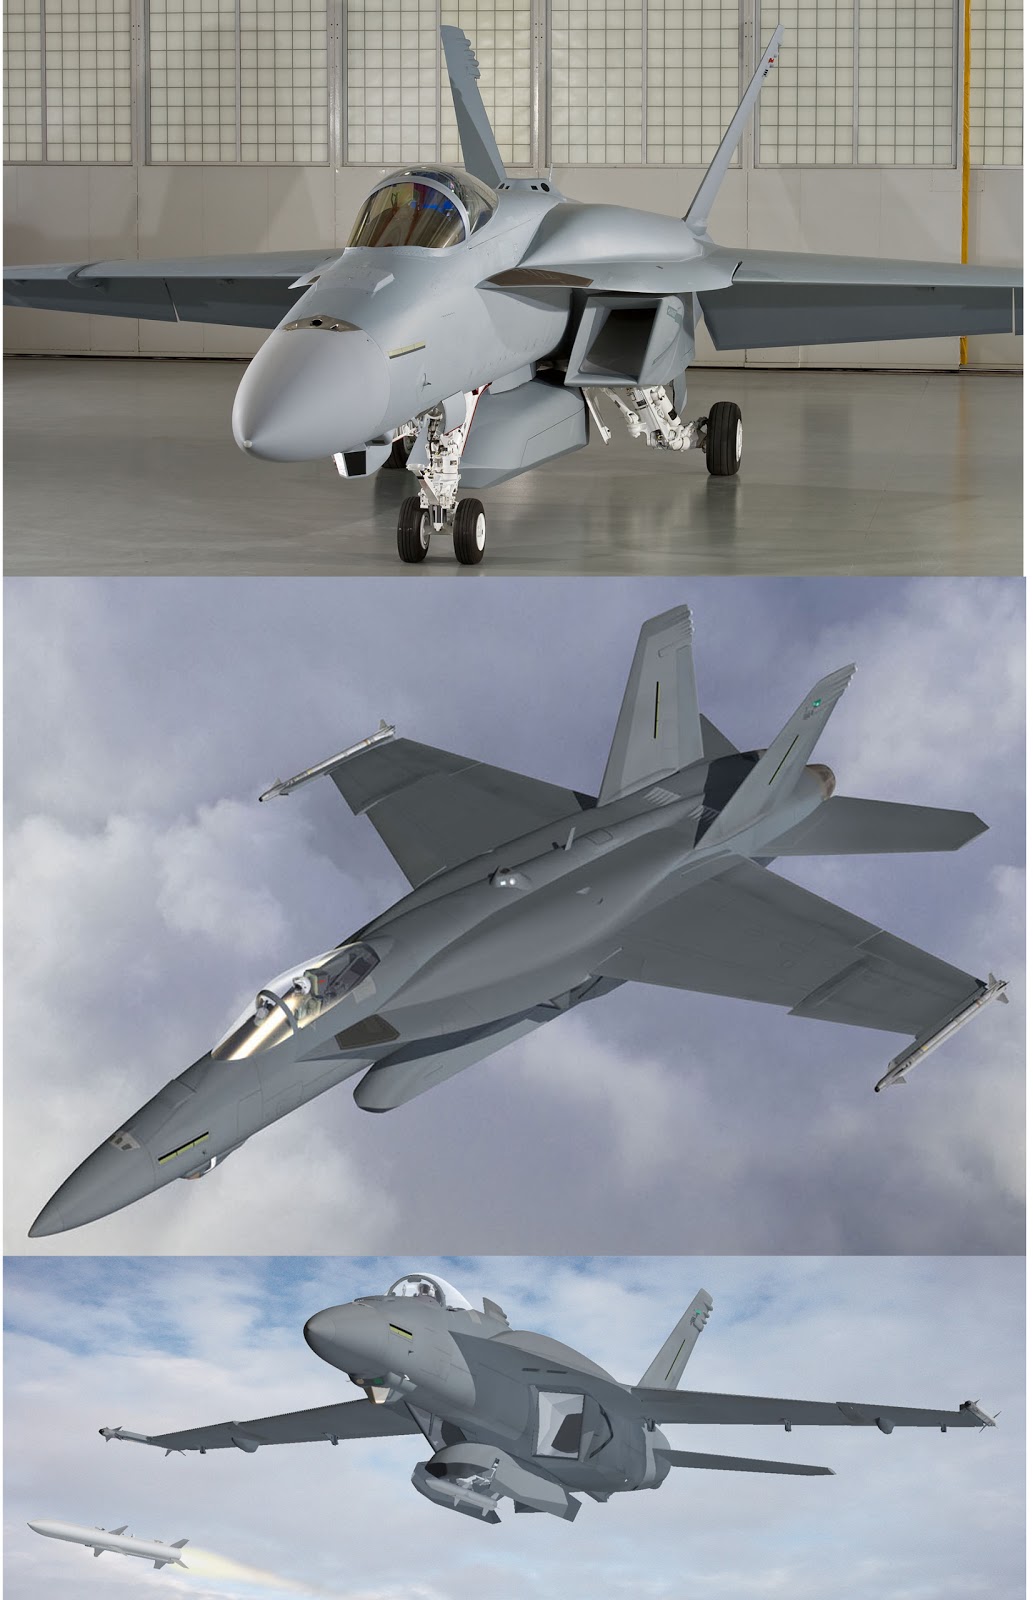 Super+Hornet+equipped+with+belly-mounted+IRST+sensor+and+enclosed+weapons-carriage+pod%252C+plus+overwing+conformal+fuel+tanks.jpg